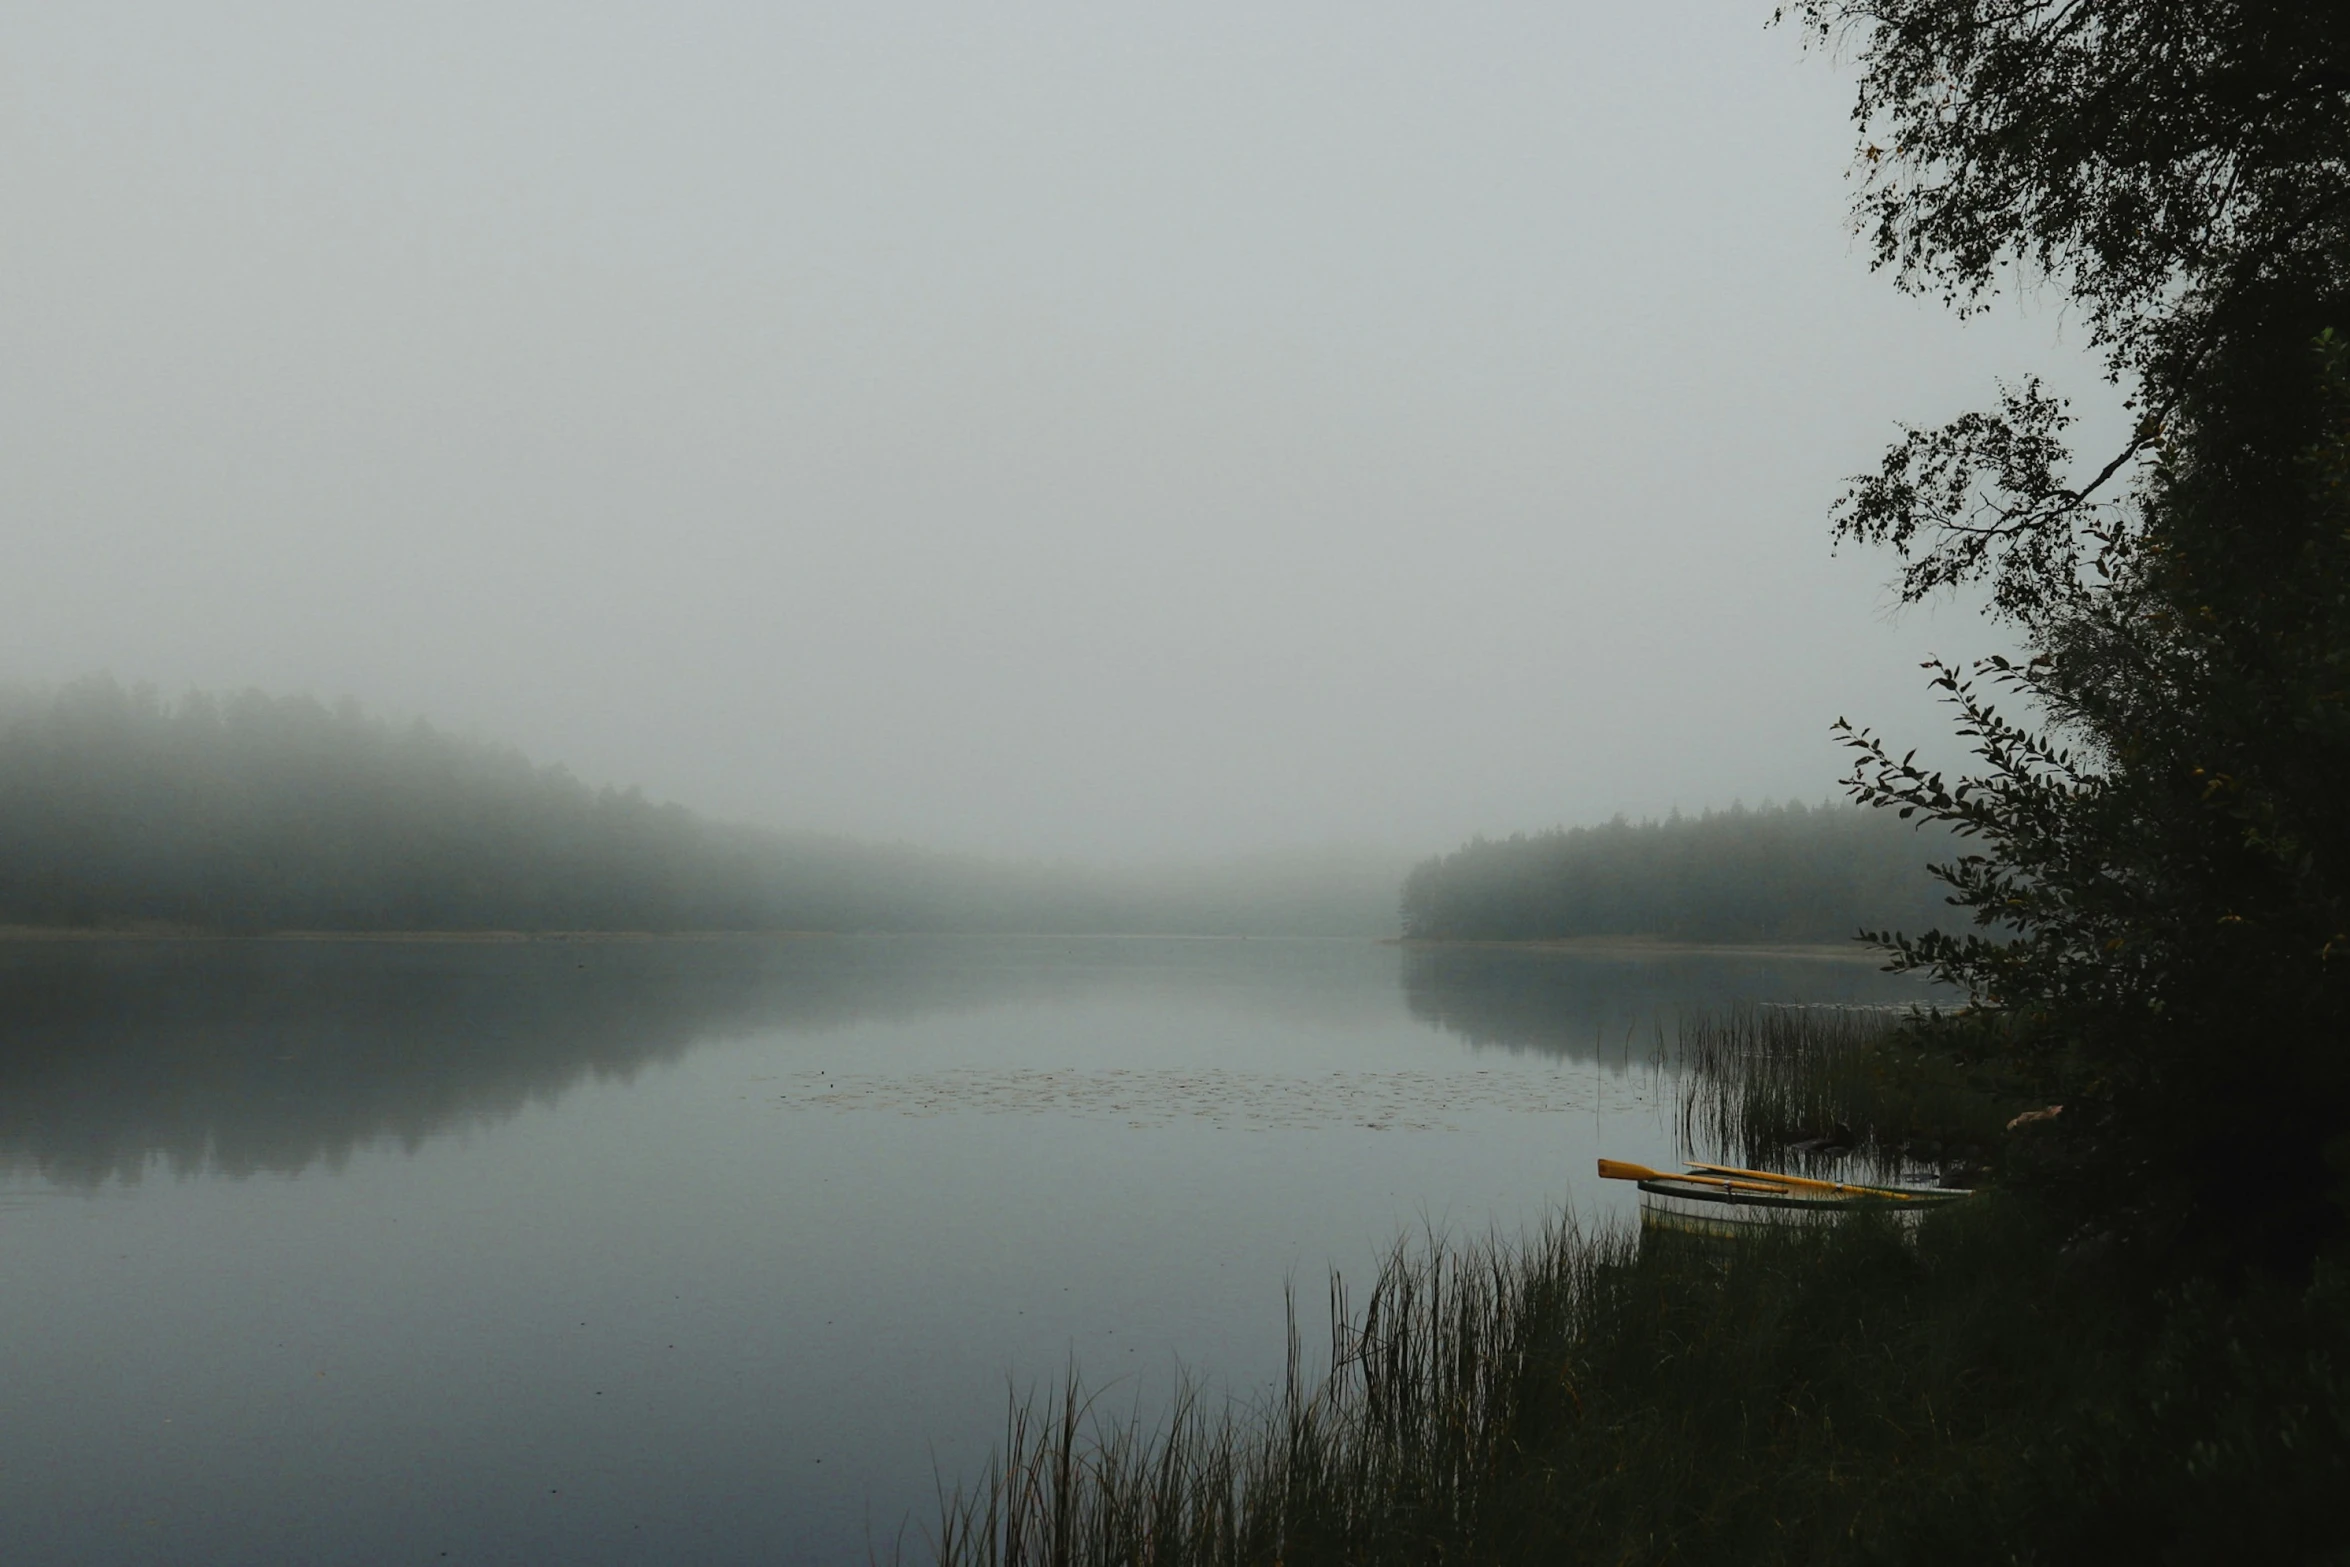 a canoe in a lake, with fog in the background